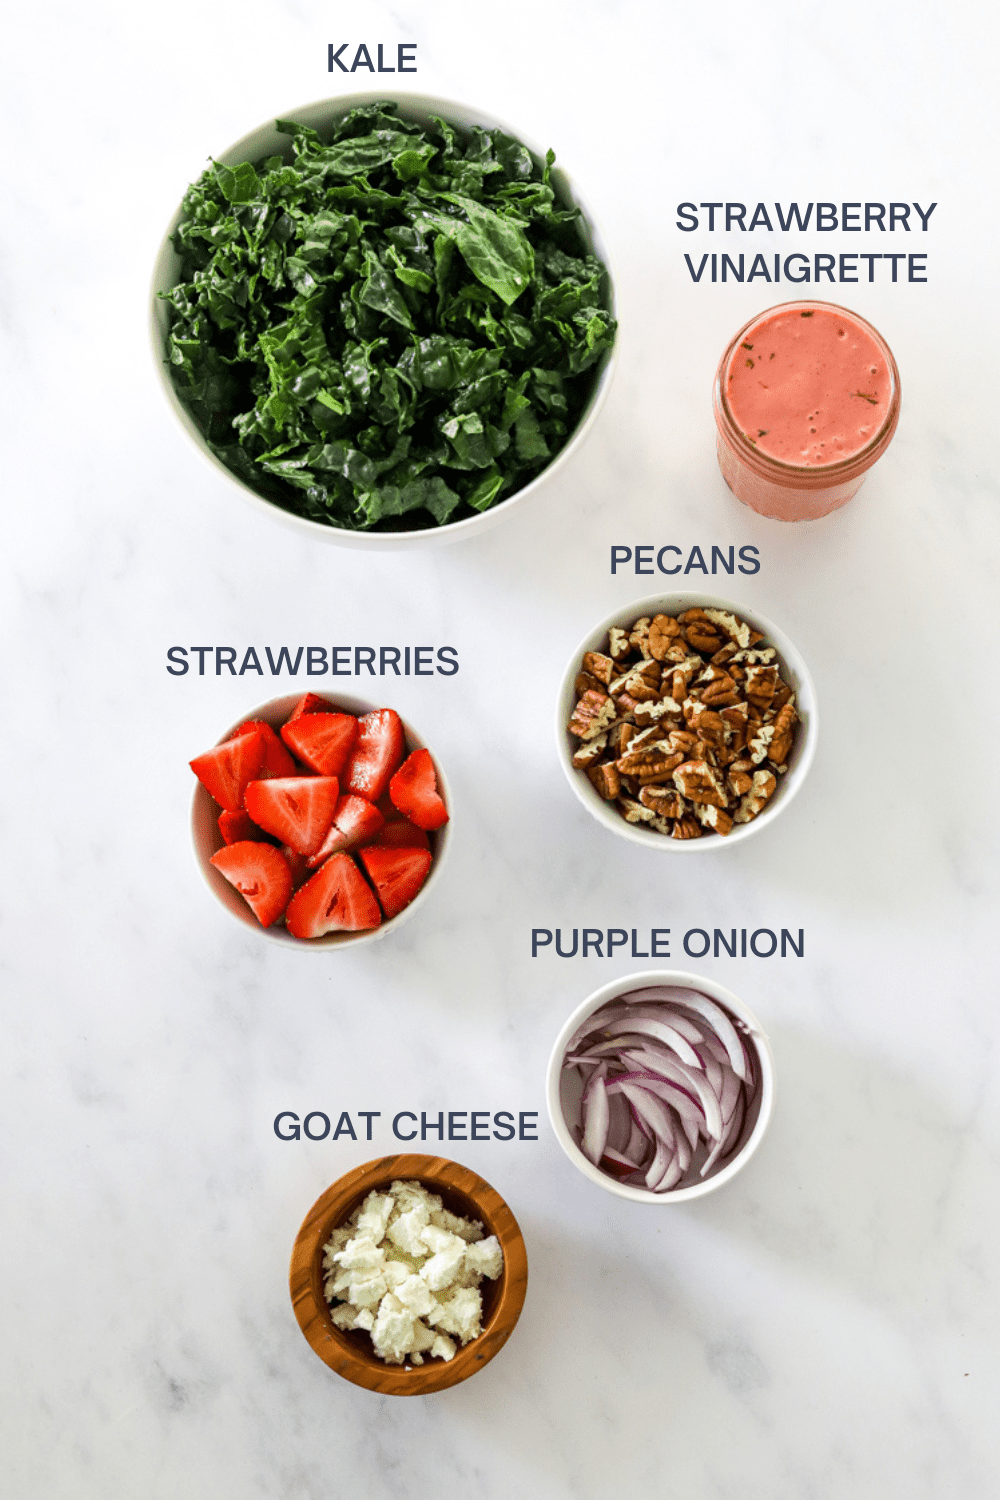 Kale and strawberry salad ingredients with labels over the top of each ingredient. 